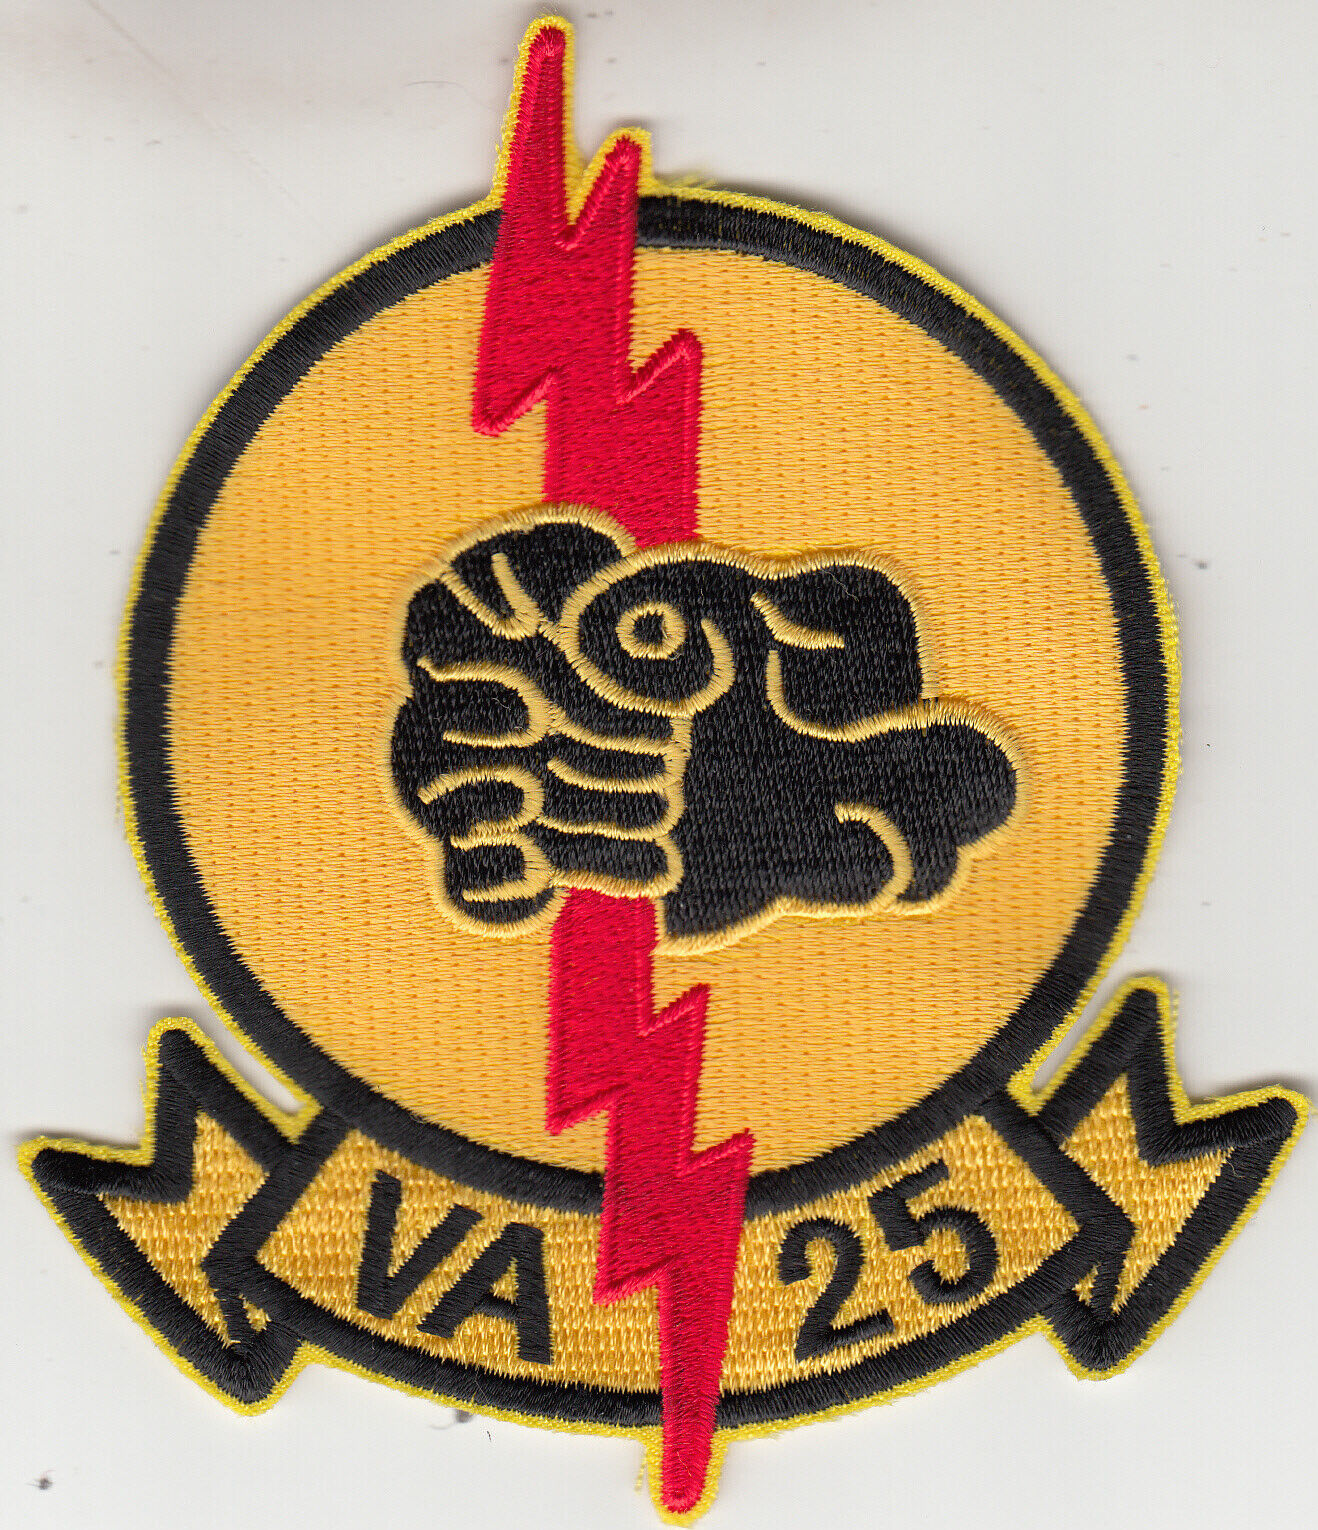 VA-25 FIST OF THE FLEET THROWBACK CHEST PATCH [Item 025003]